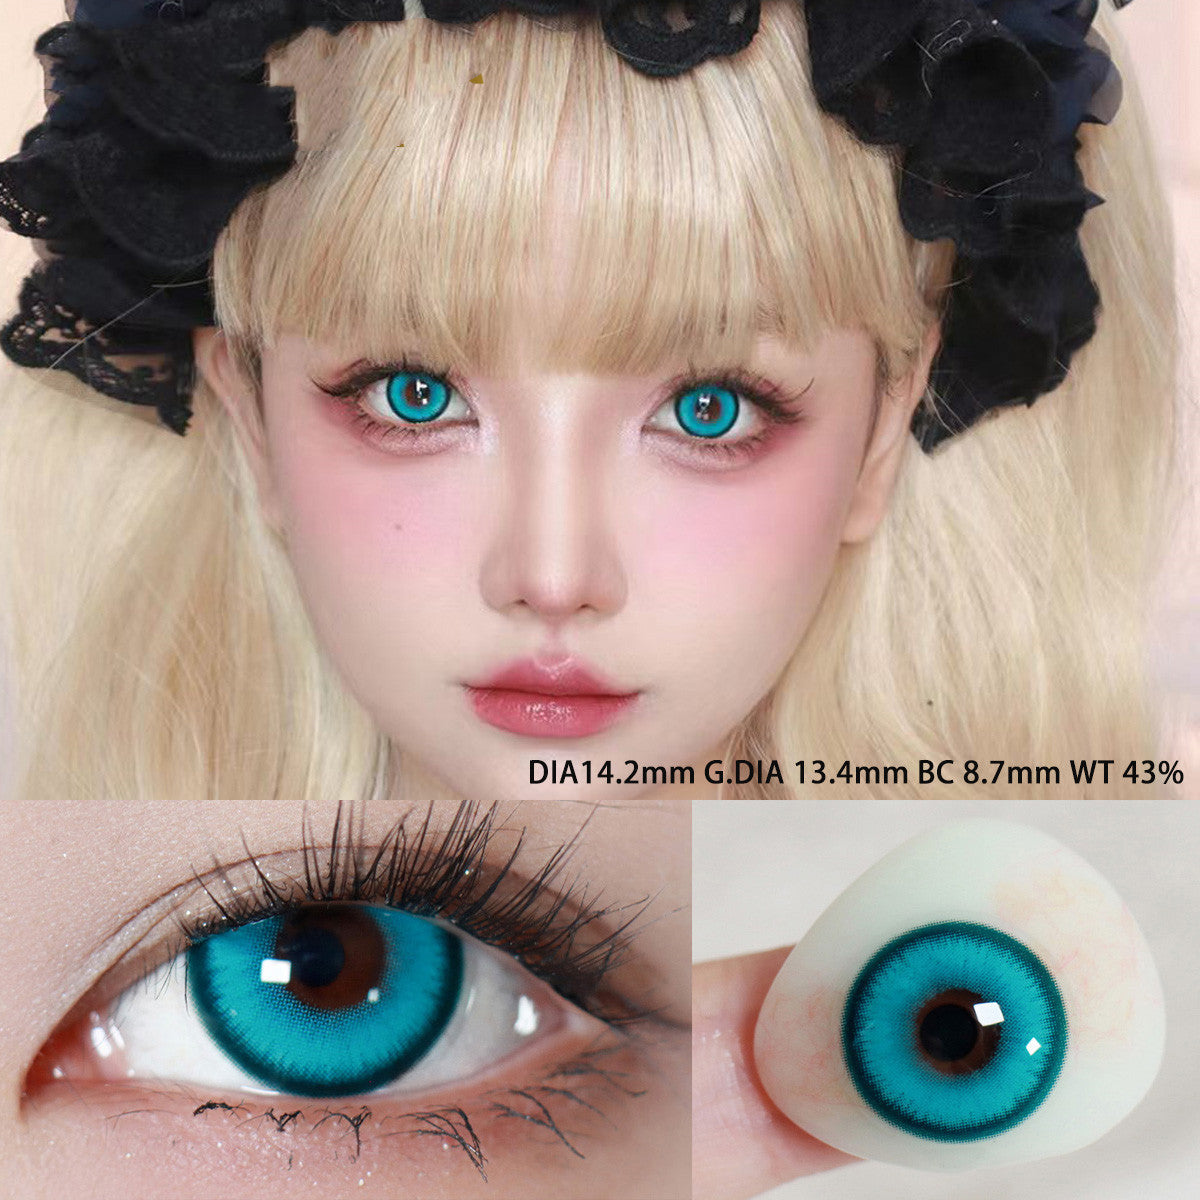 1 DAY DISPOSABLE COLOR CONTACT LENSES YV50038